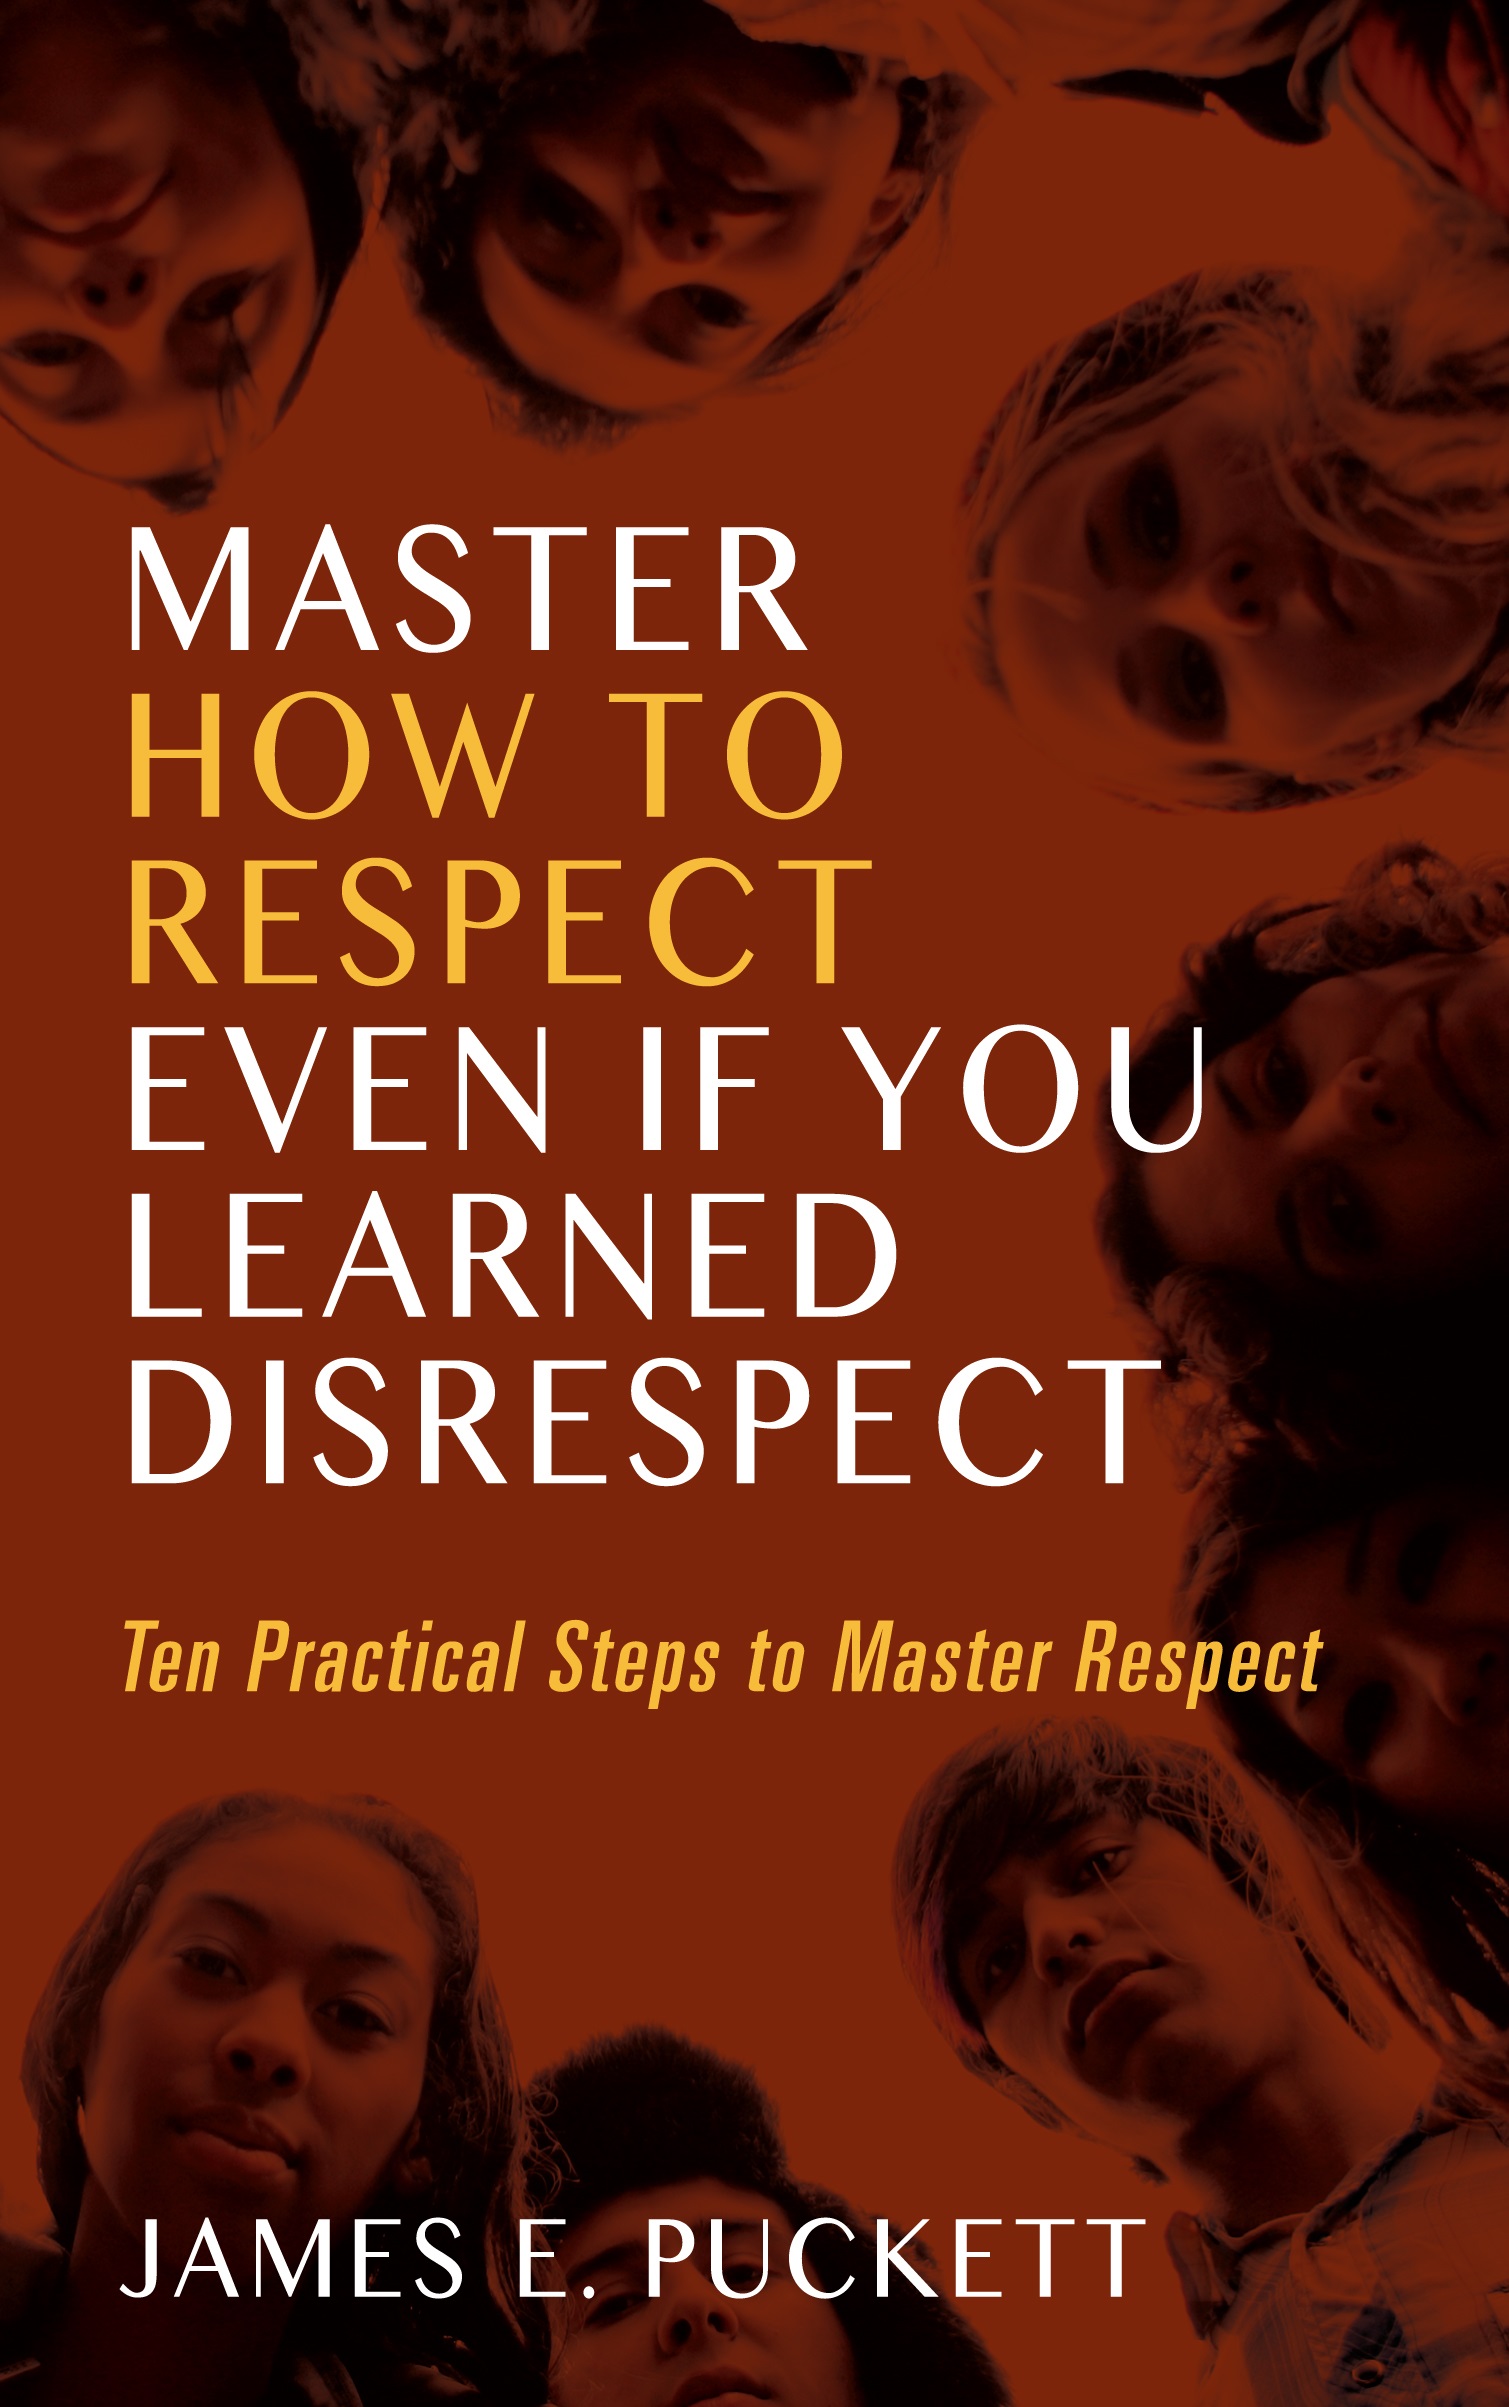 Master How To Respect Even If You Learned Disrespect - book author James